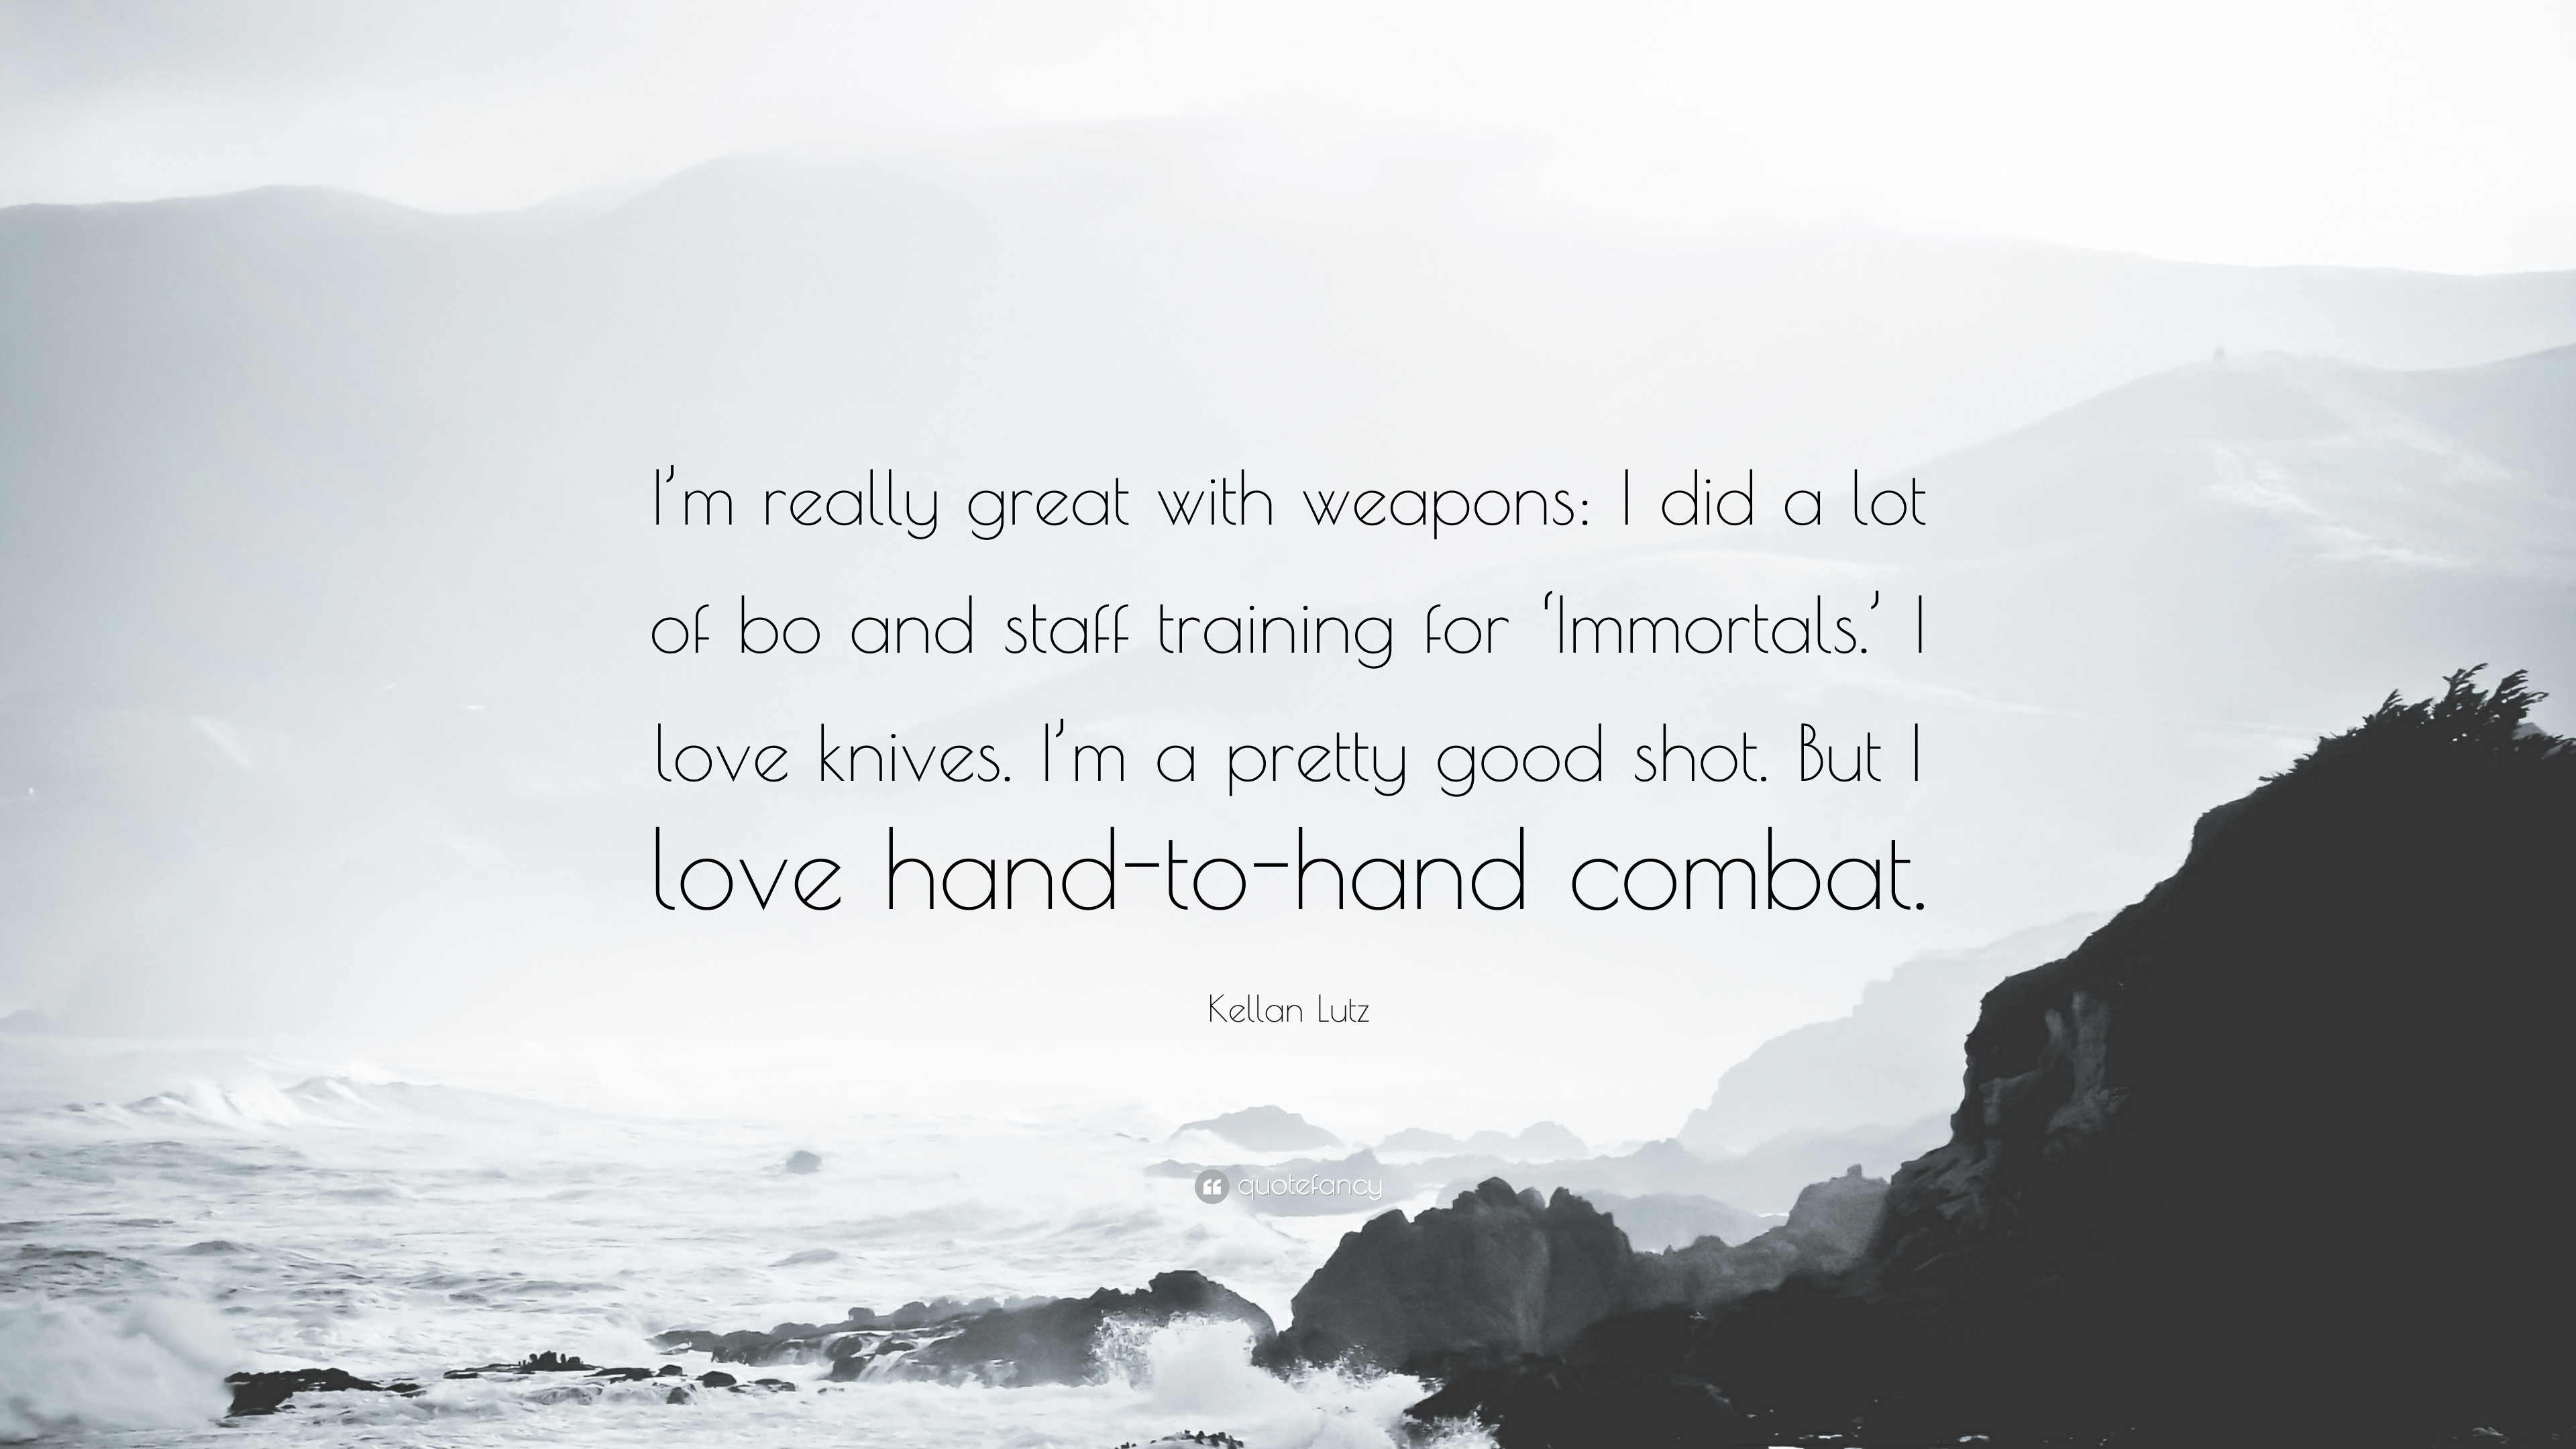 Kellan Lutz Quote: “I'm really great with weapons: I did a